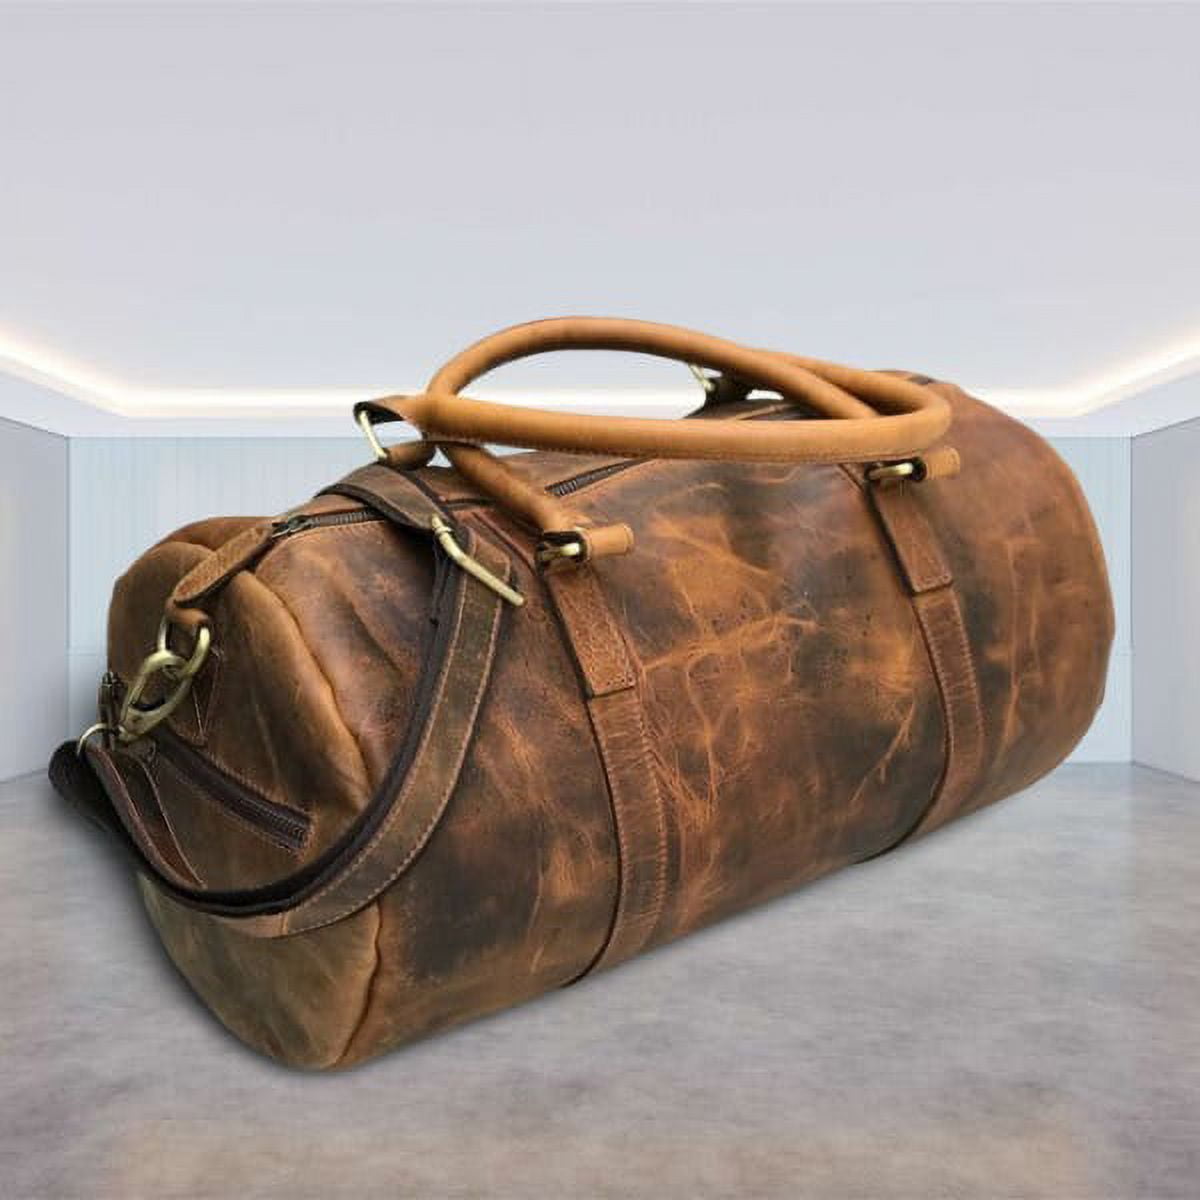 Personalized Full Grain Leather Travel Bag with shoe Pouch Weekend Bag  Duffel Bag Leather Duffle with shoe Compartment